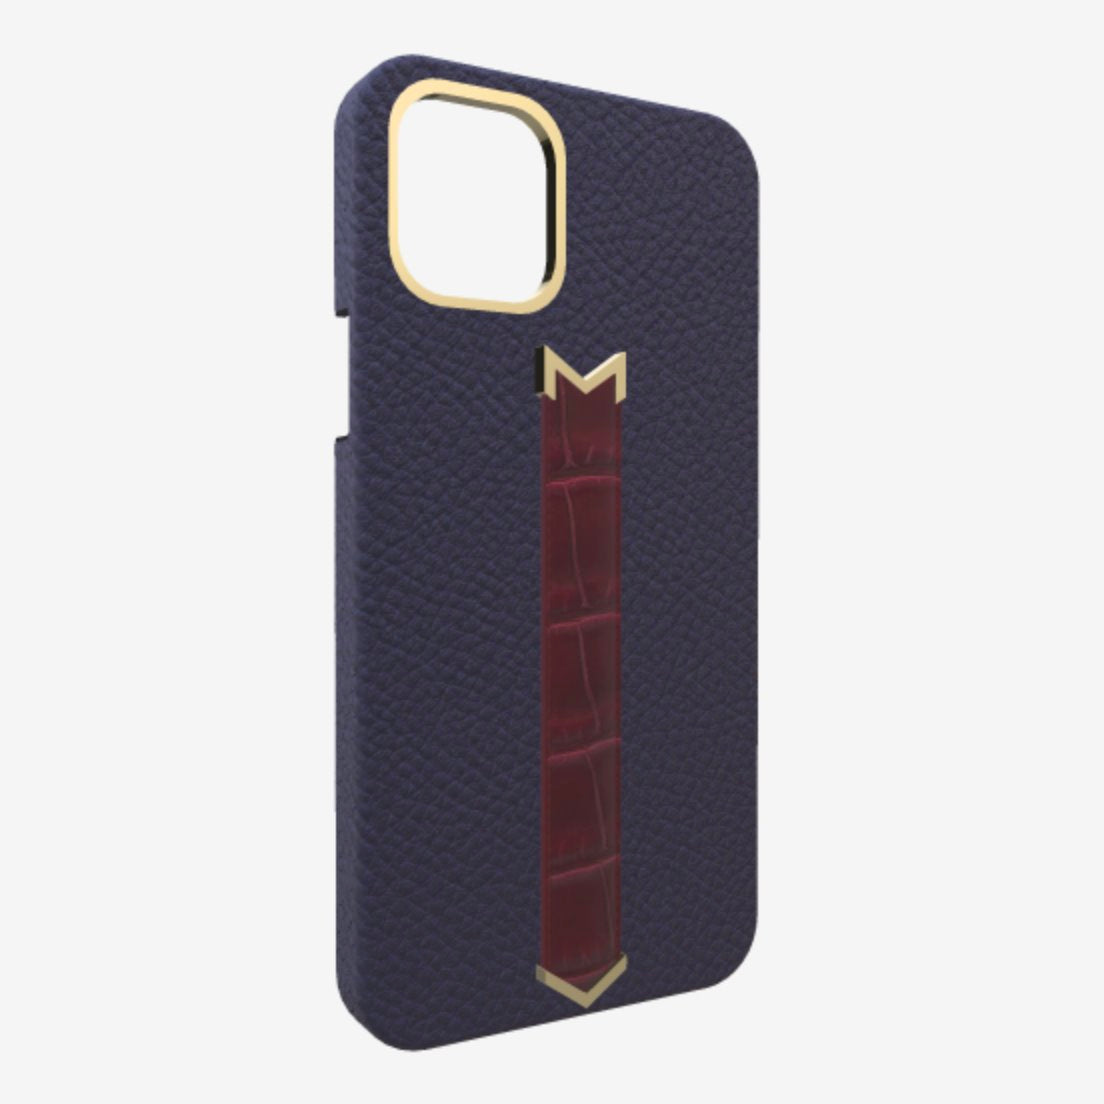 Gold Finger Strap Case for iPhone 13 in Genuine Calfskin and Alligator Navy Blue Burgundy Palace 